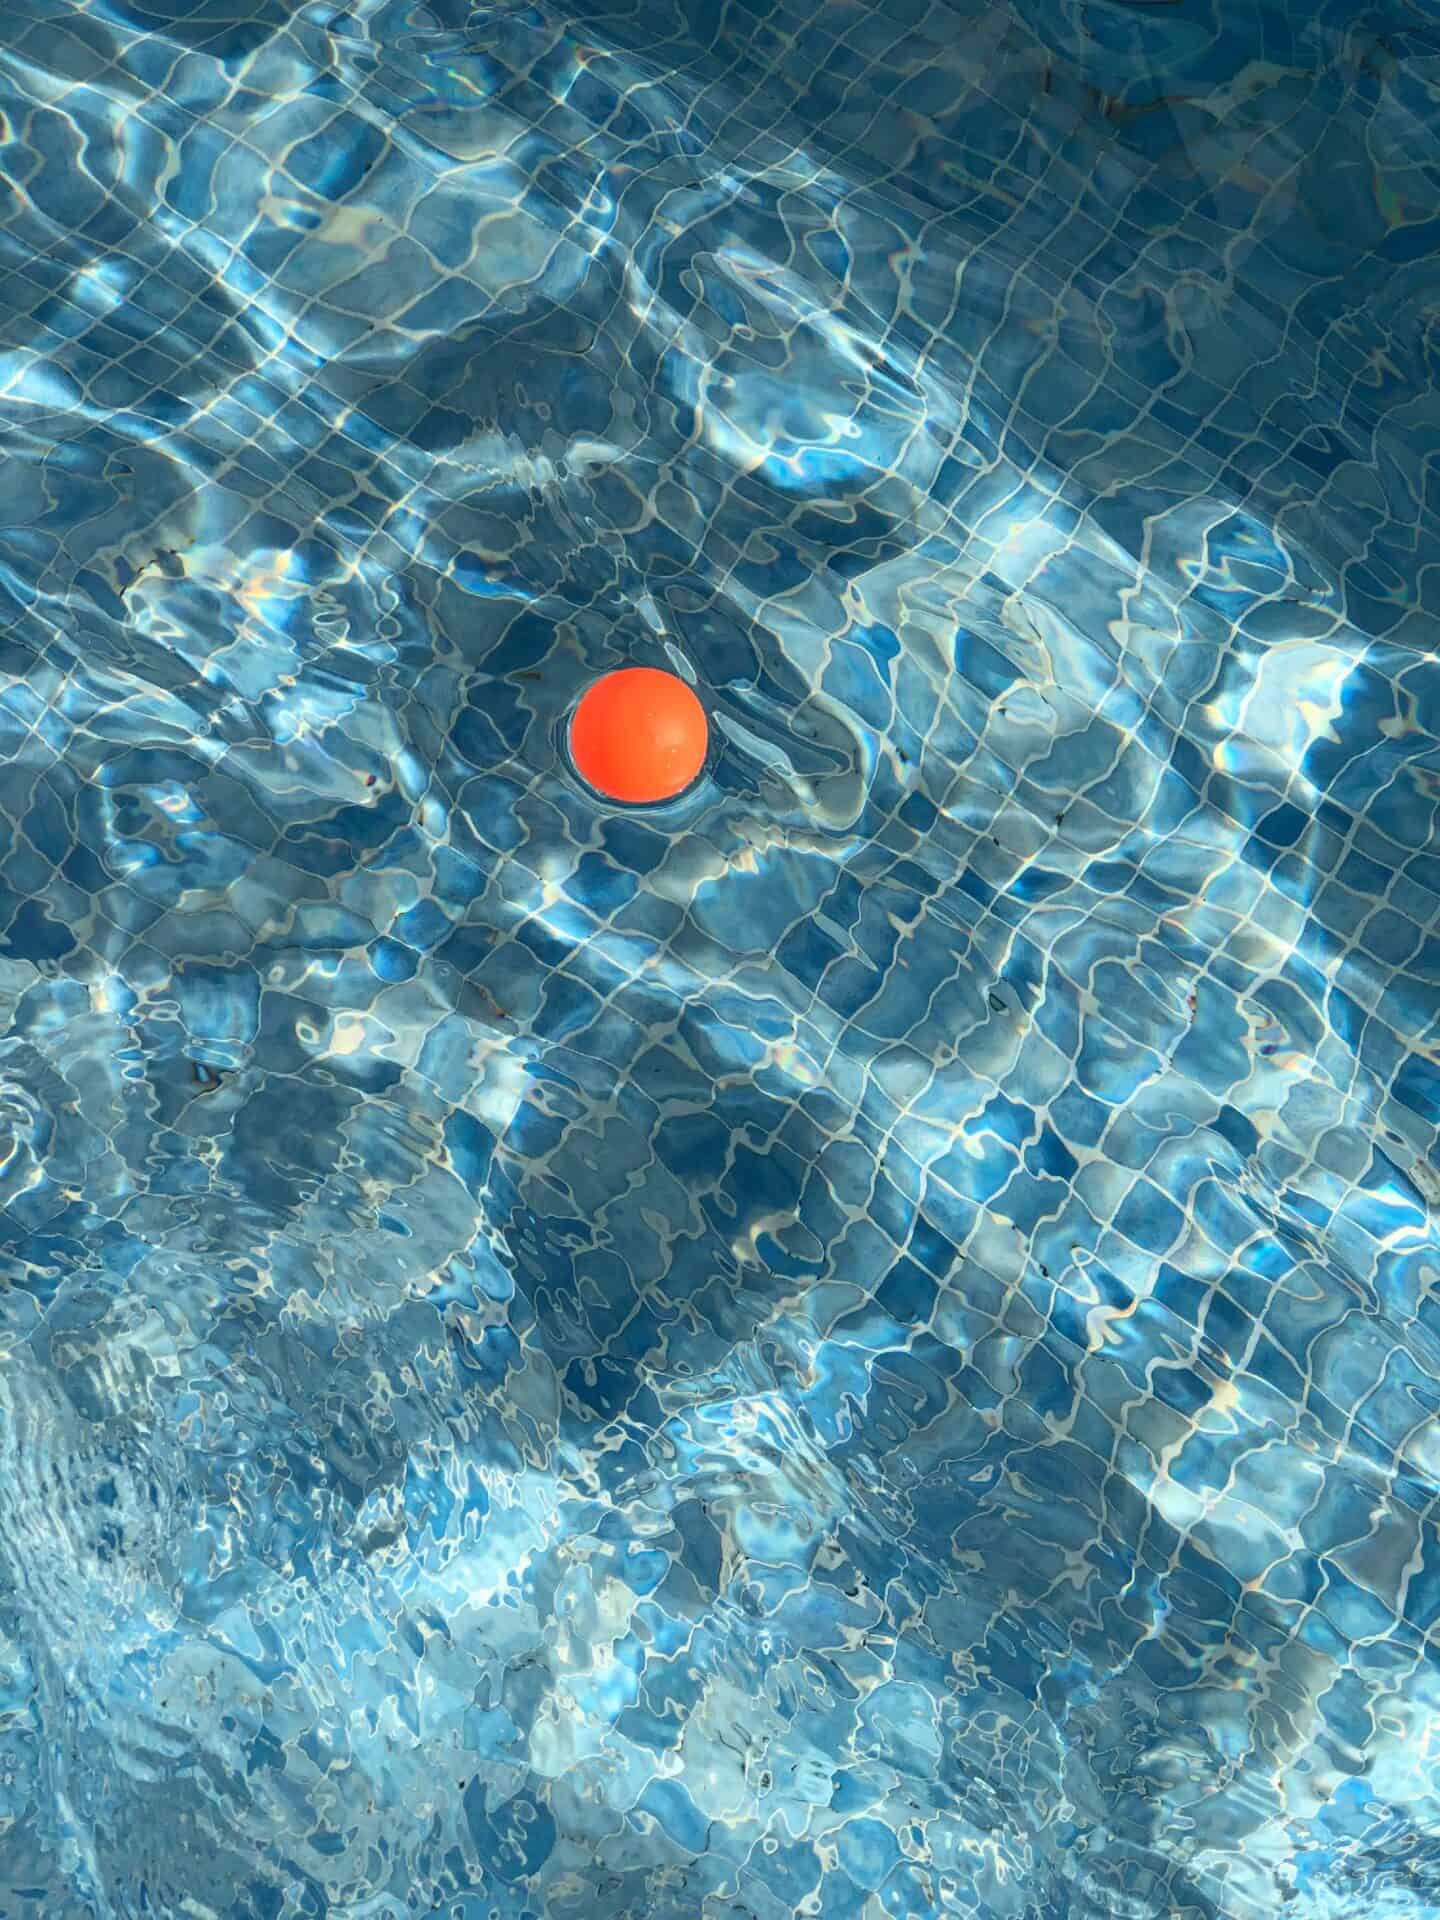 A bright orange ping-pong ball contrasts the light blue water as it floats in a swimming pool.